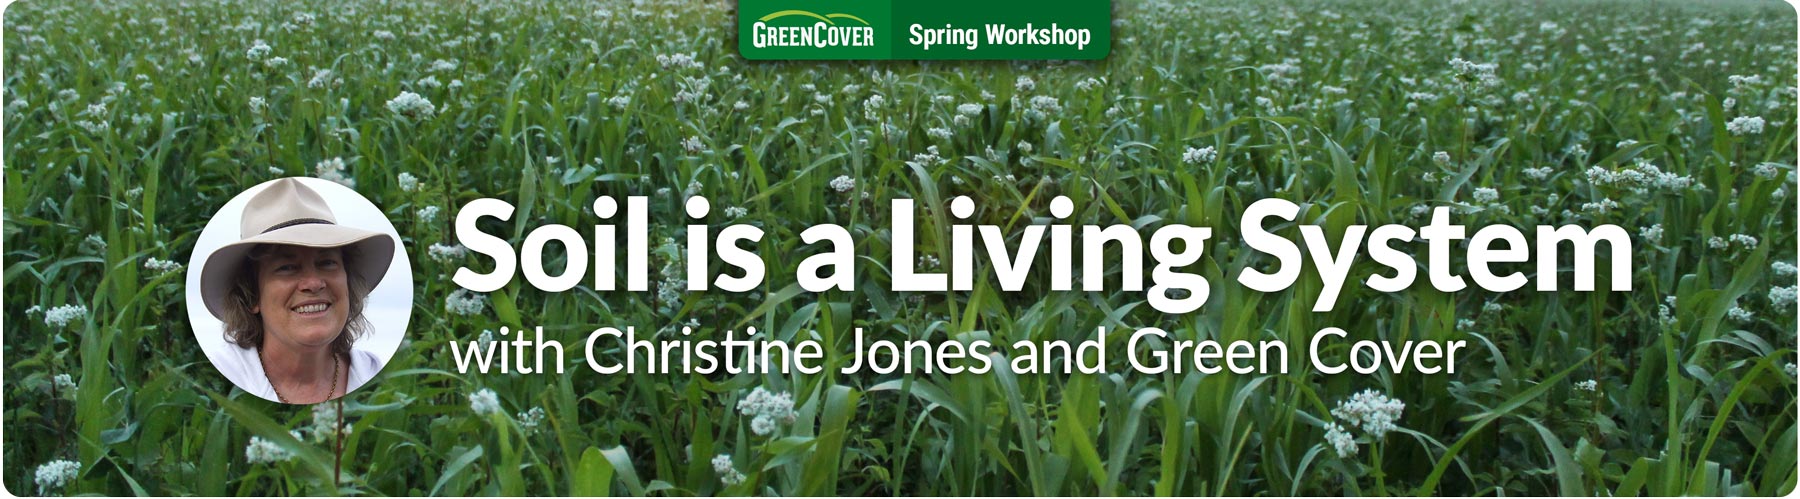 Spring Workshop: Soil is a Living System with Christine Jones and Green Cover